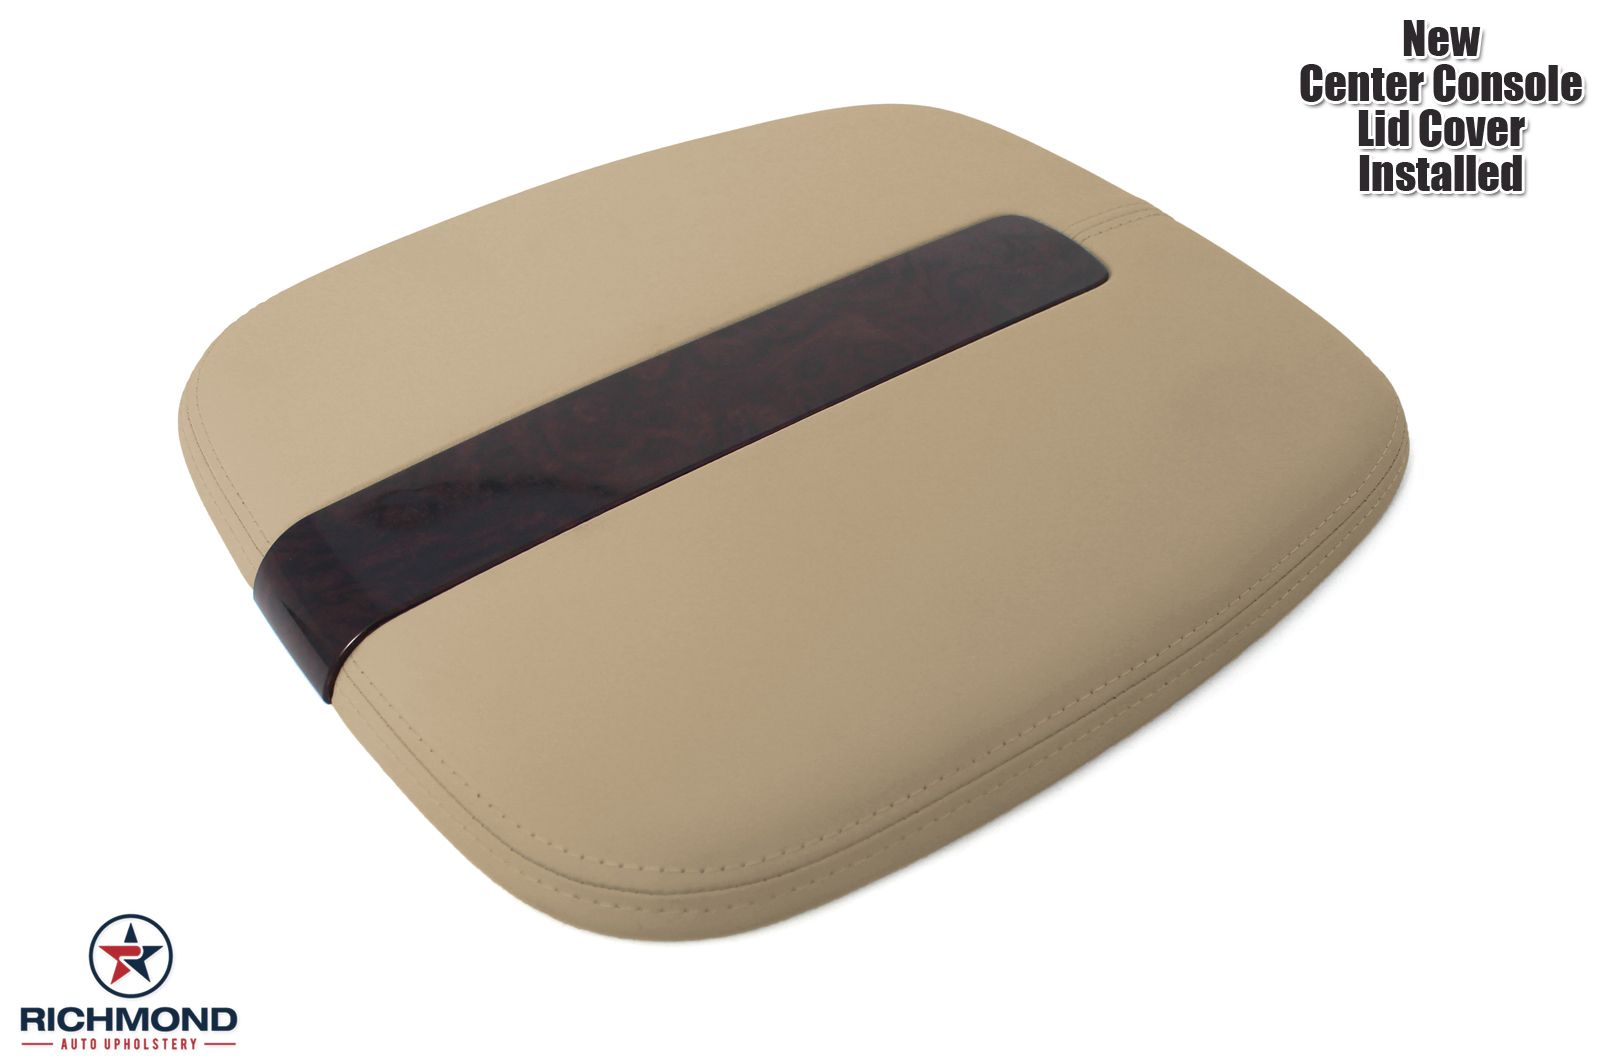  photo Tan-Light-Cashmere-Cadillac-Escalade-Center-Console-Lid-
Replacement-Leather-Cover-1_zpsqjcfsyk4.jpg